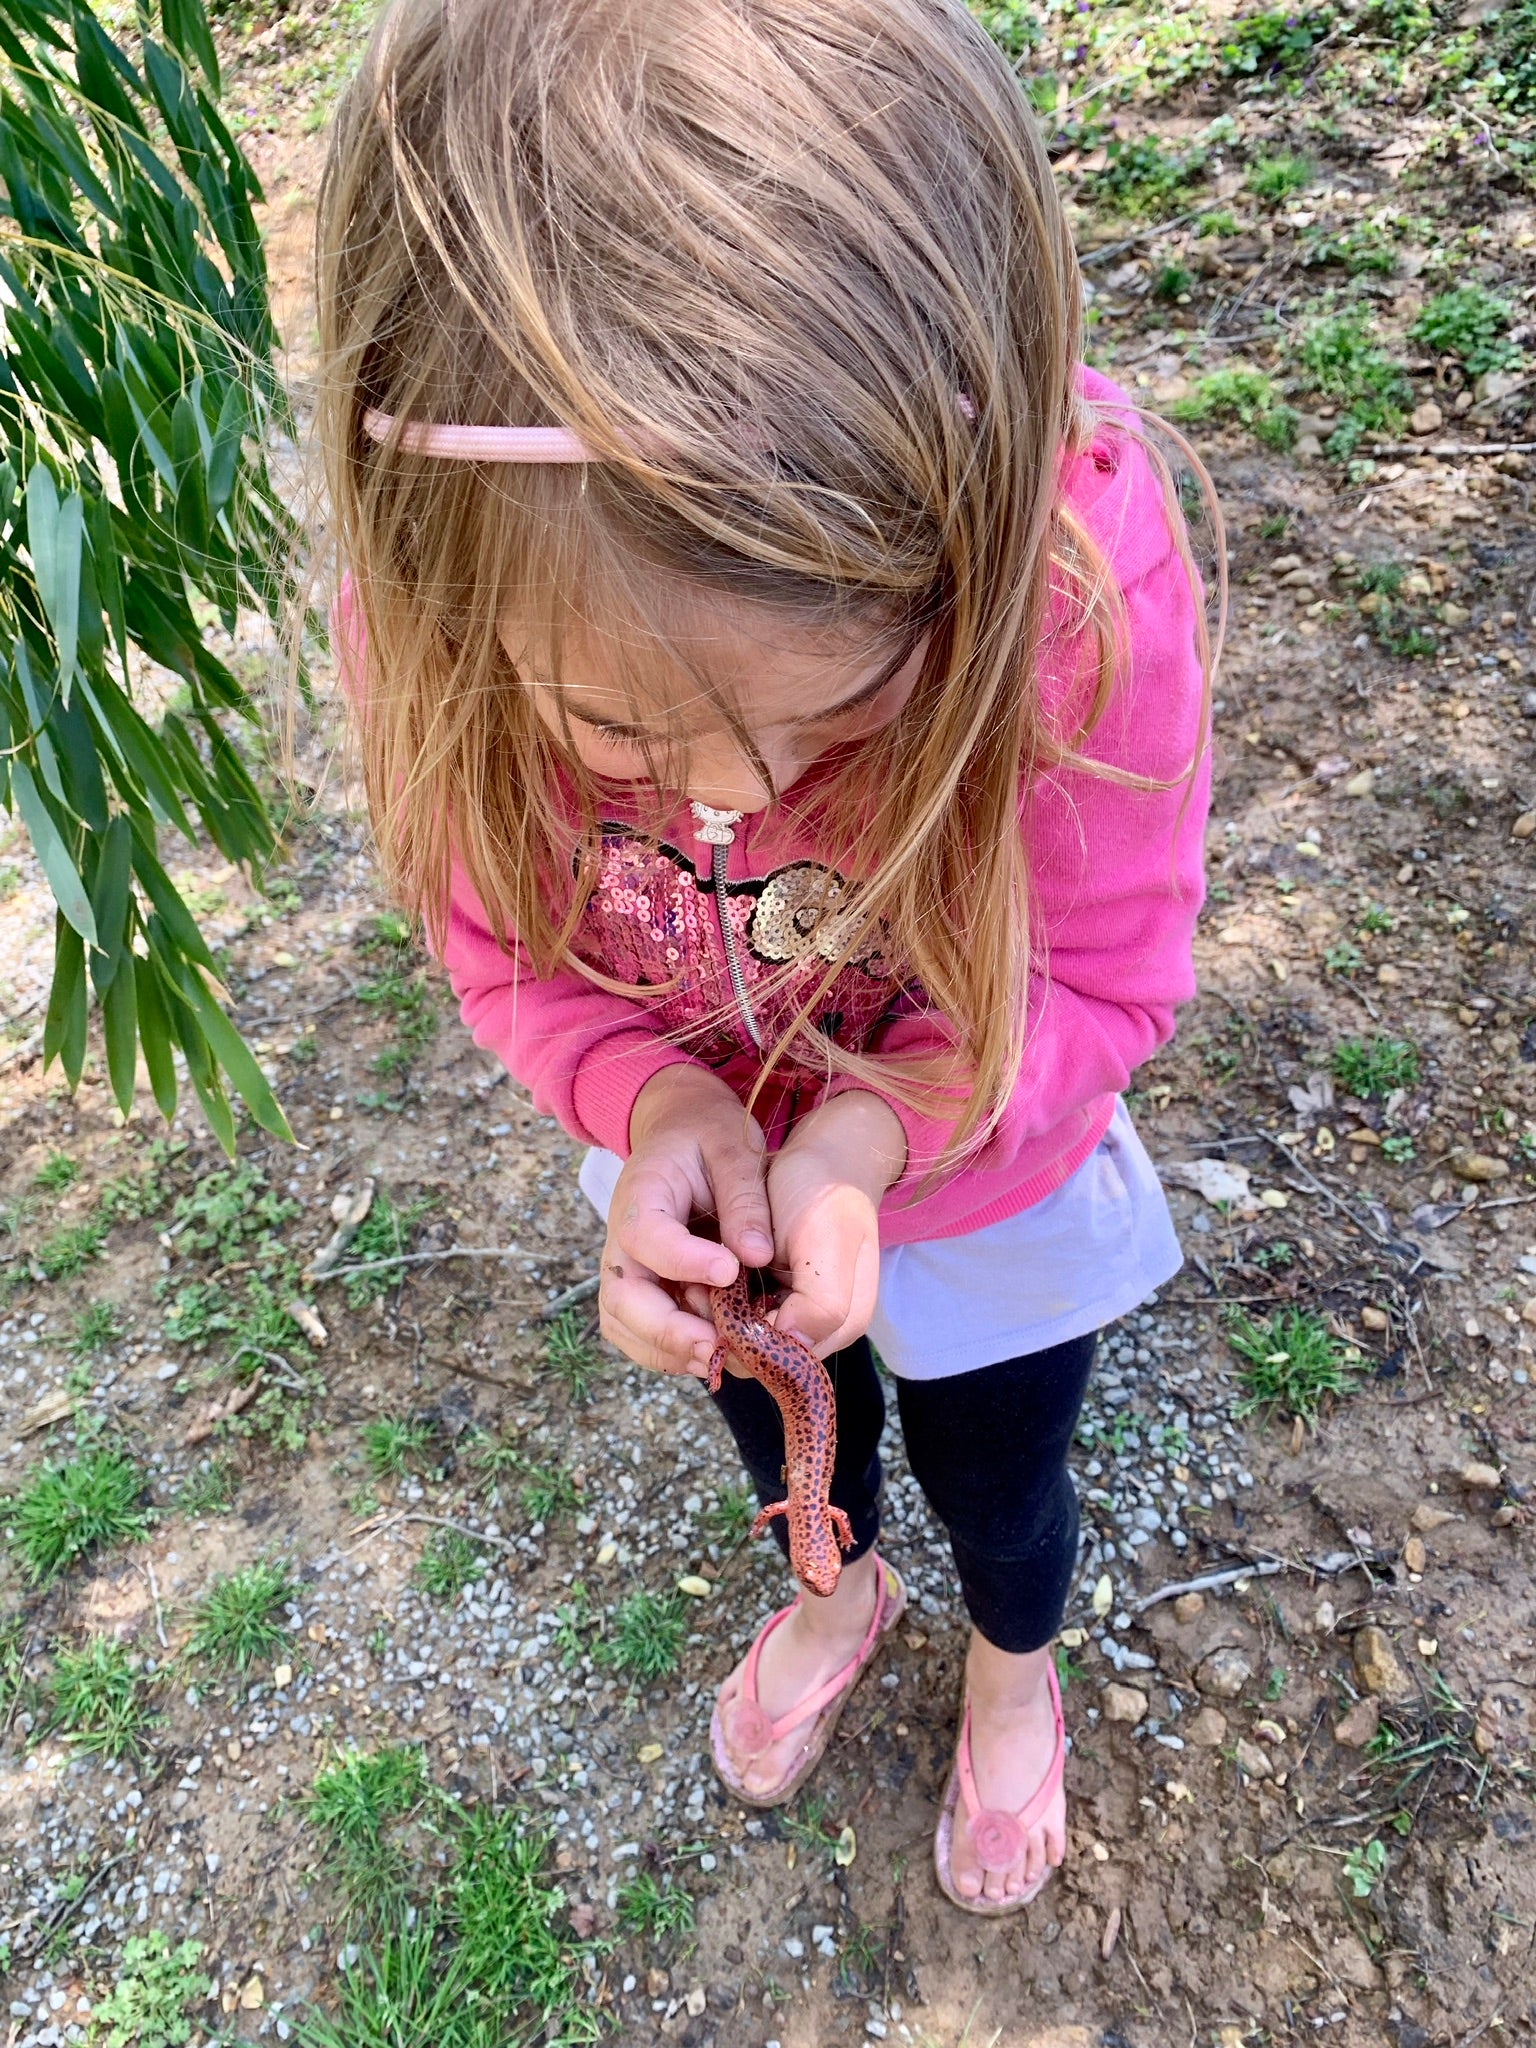 Granddaughter loved the red salamander she found with her dad and PawPaw.